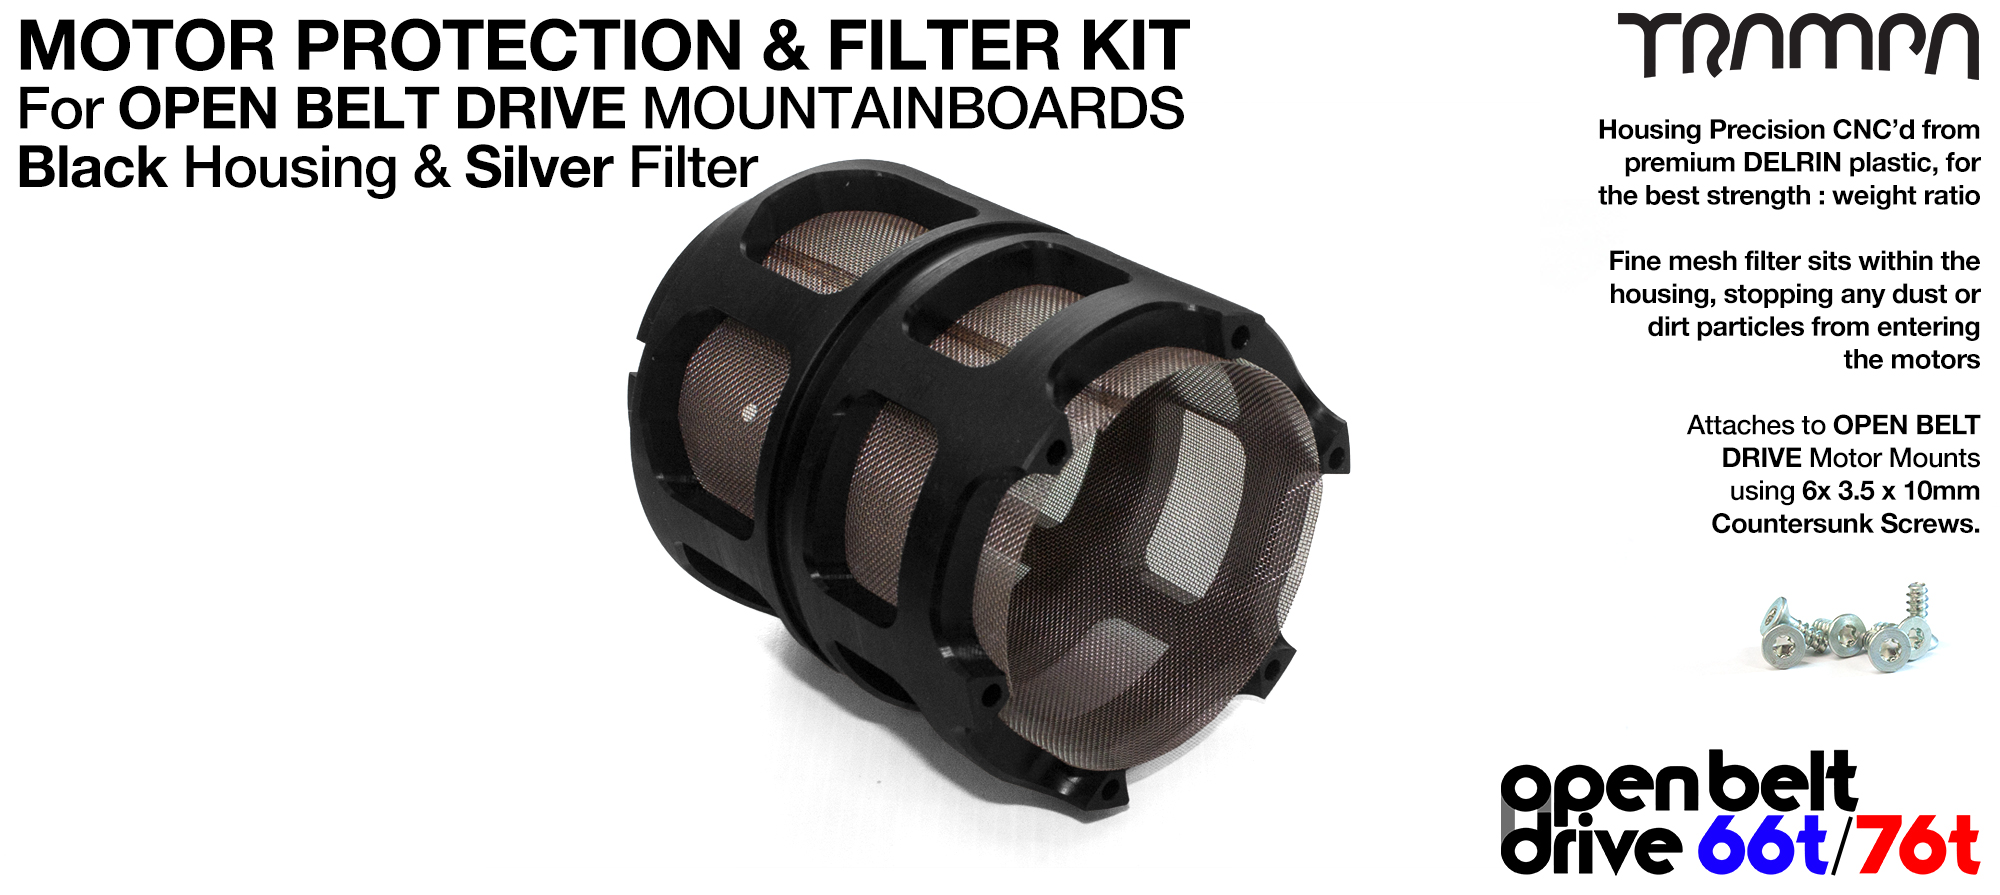 1x PRO Belt ORIGINAL Motor protection Sleeve - with Stainless Steel Filter & Fixings